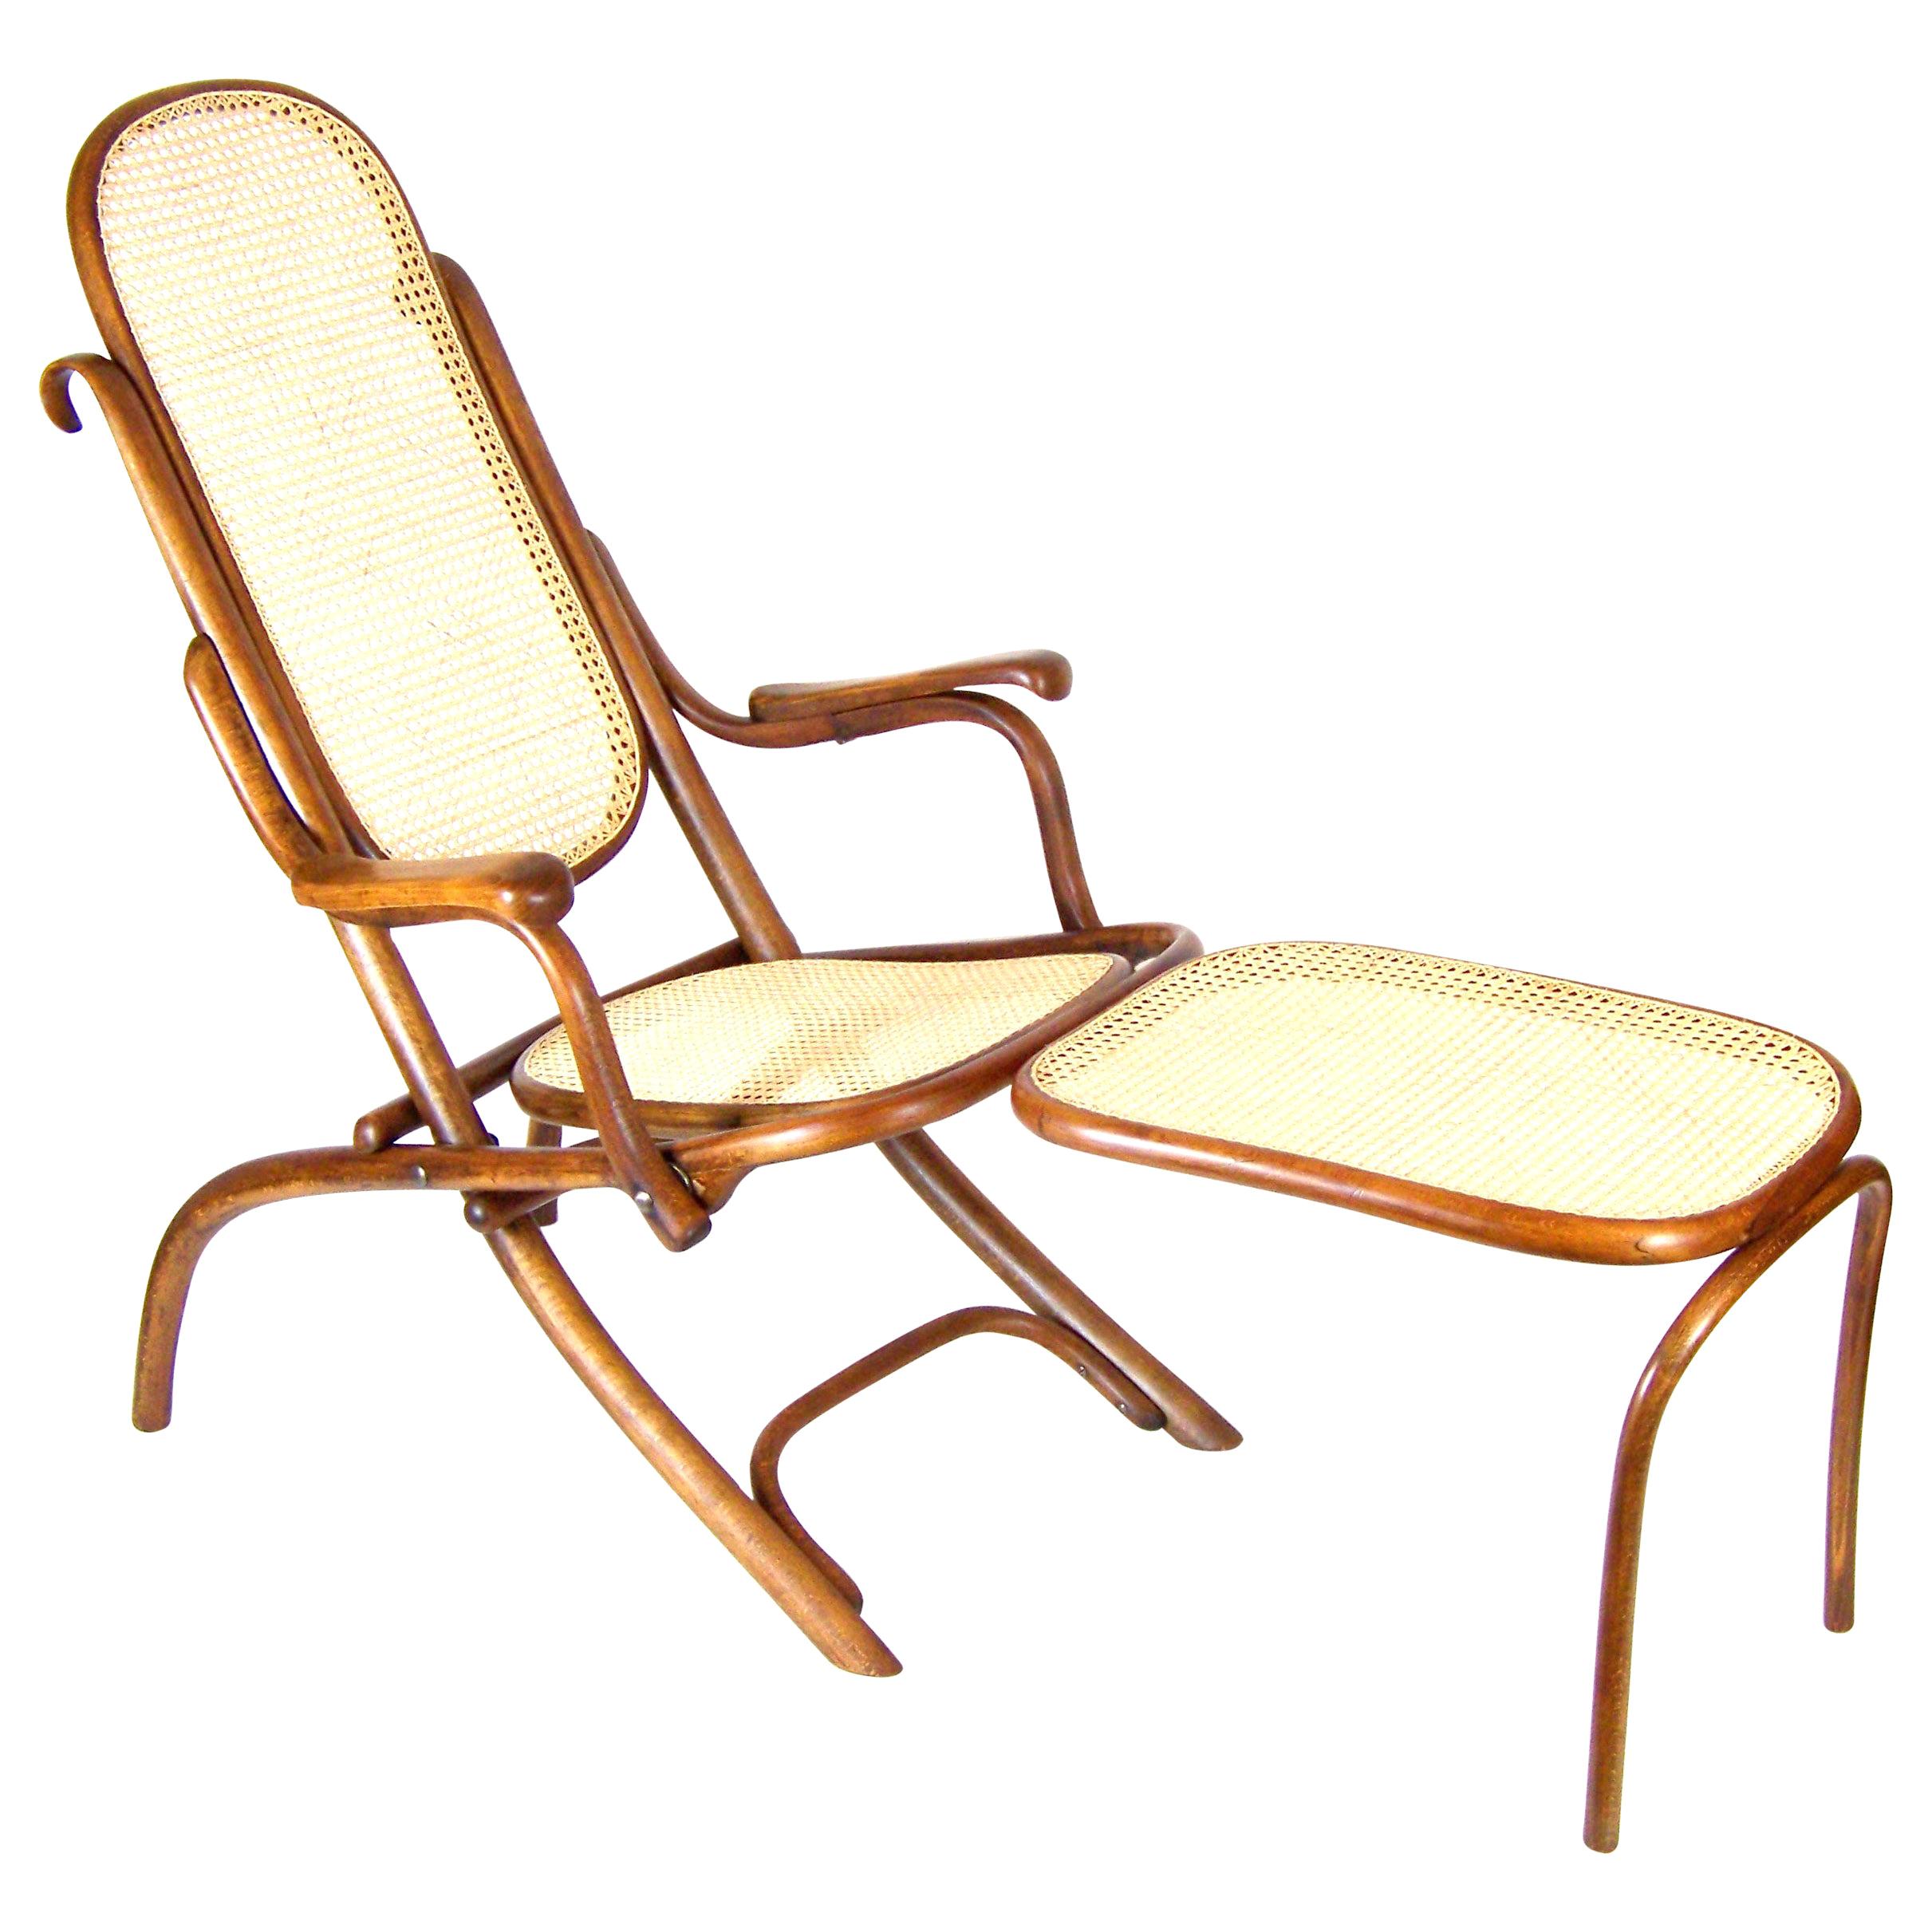 Folding Chair Thonet Nr.1 with Arms and Legrest, since 1883